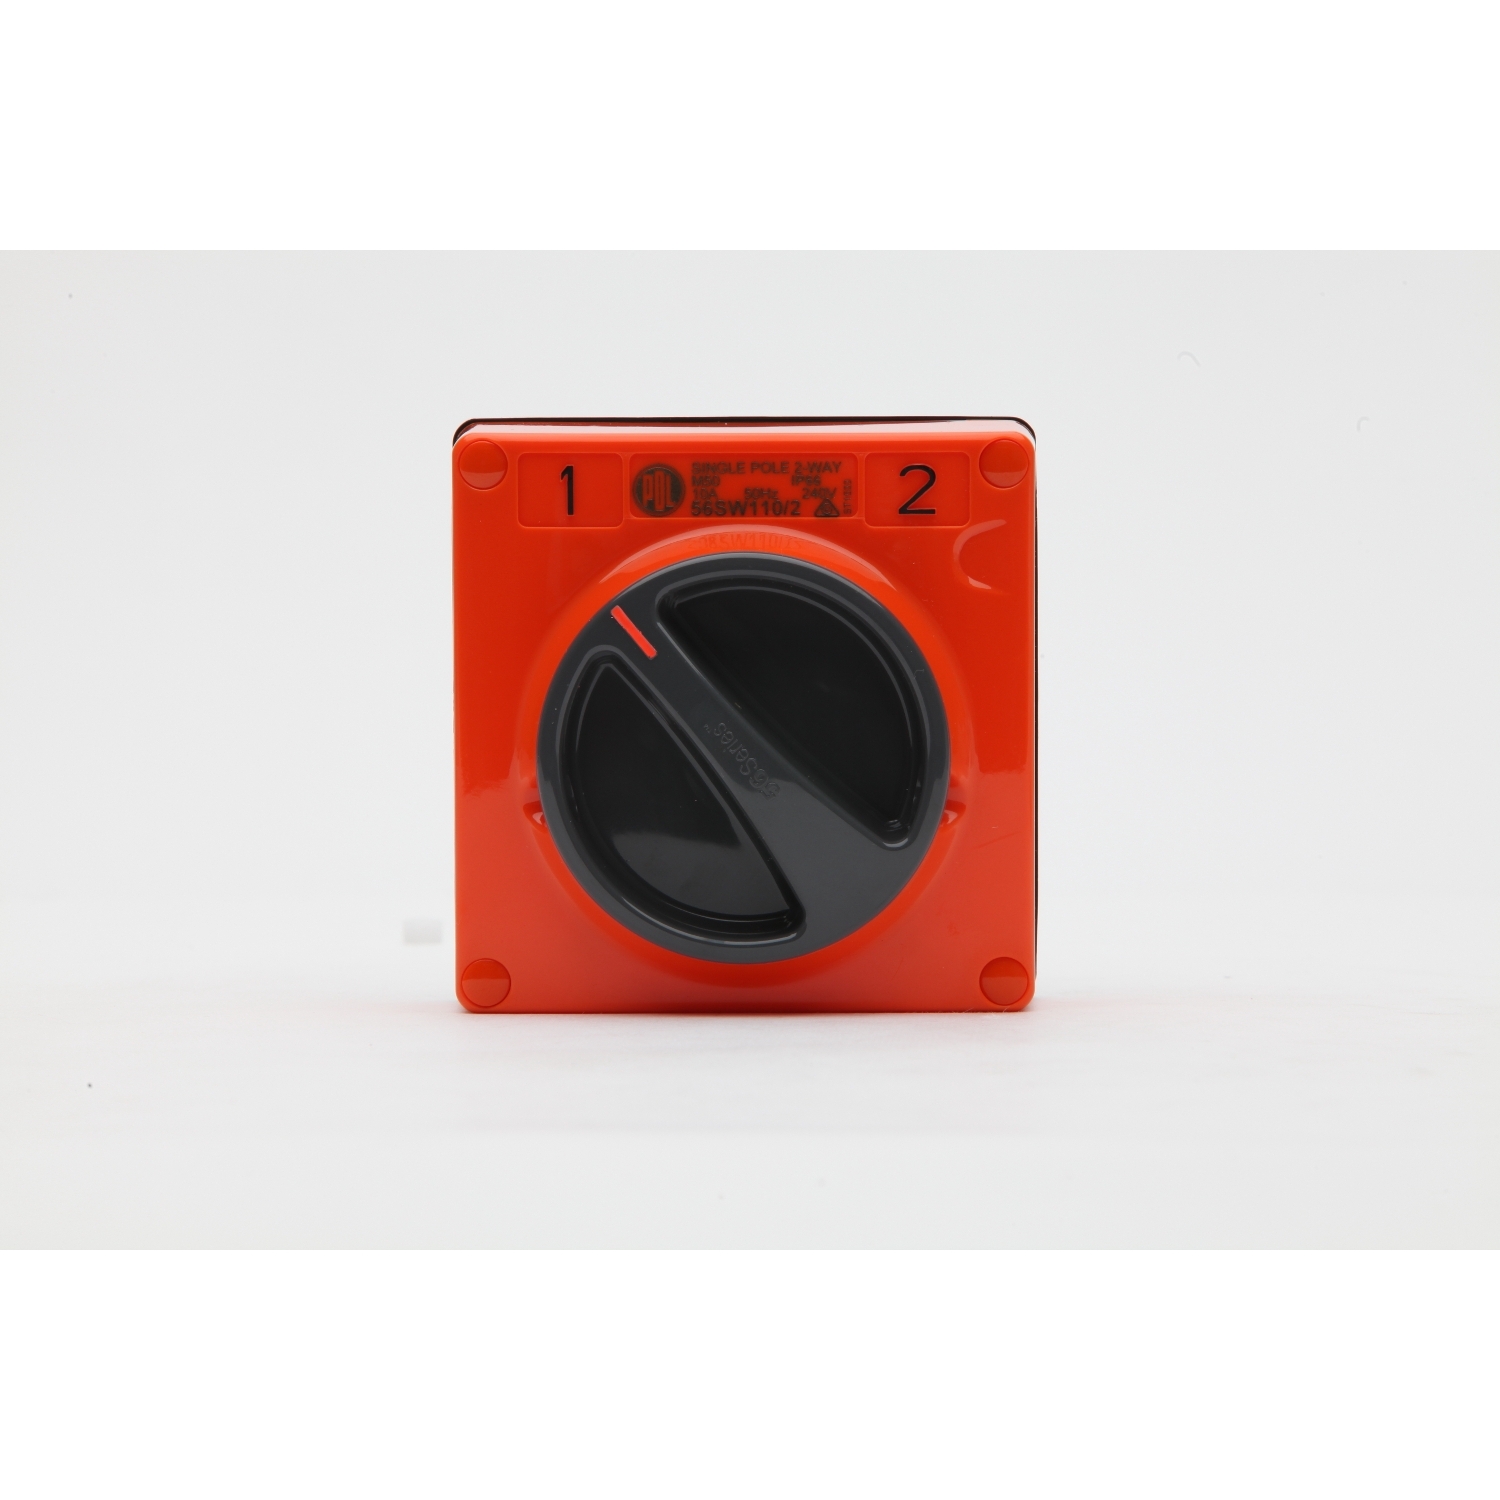 PDL 56 Series - Switch 2-Way 10A 240V 1-Pole IP66 - Chemical-Resistant Orange